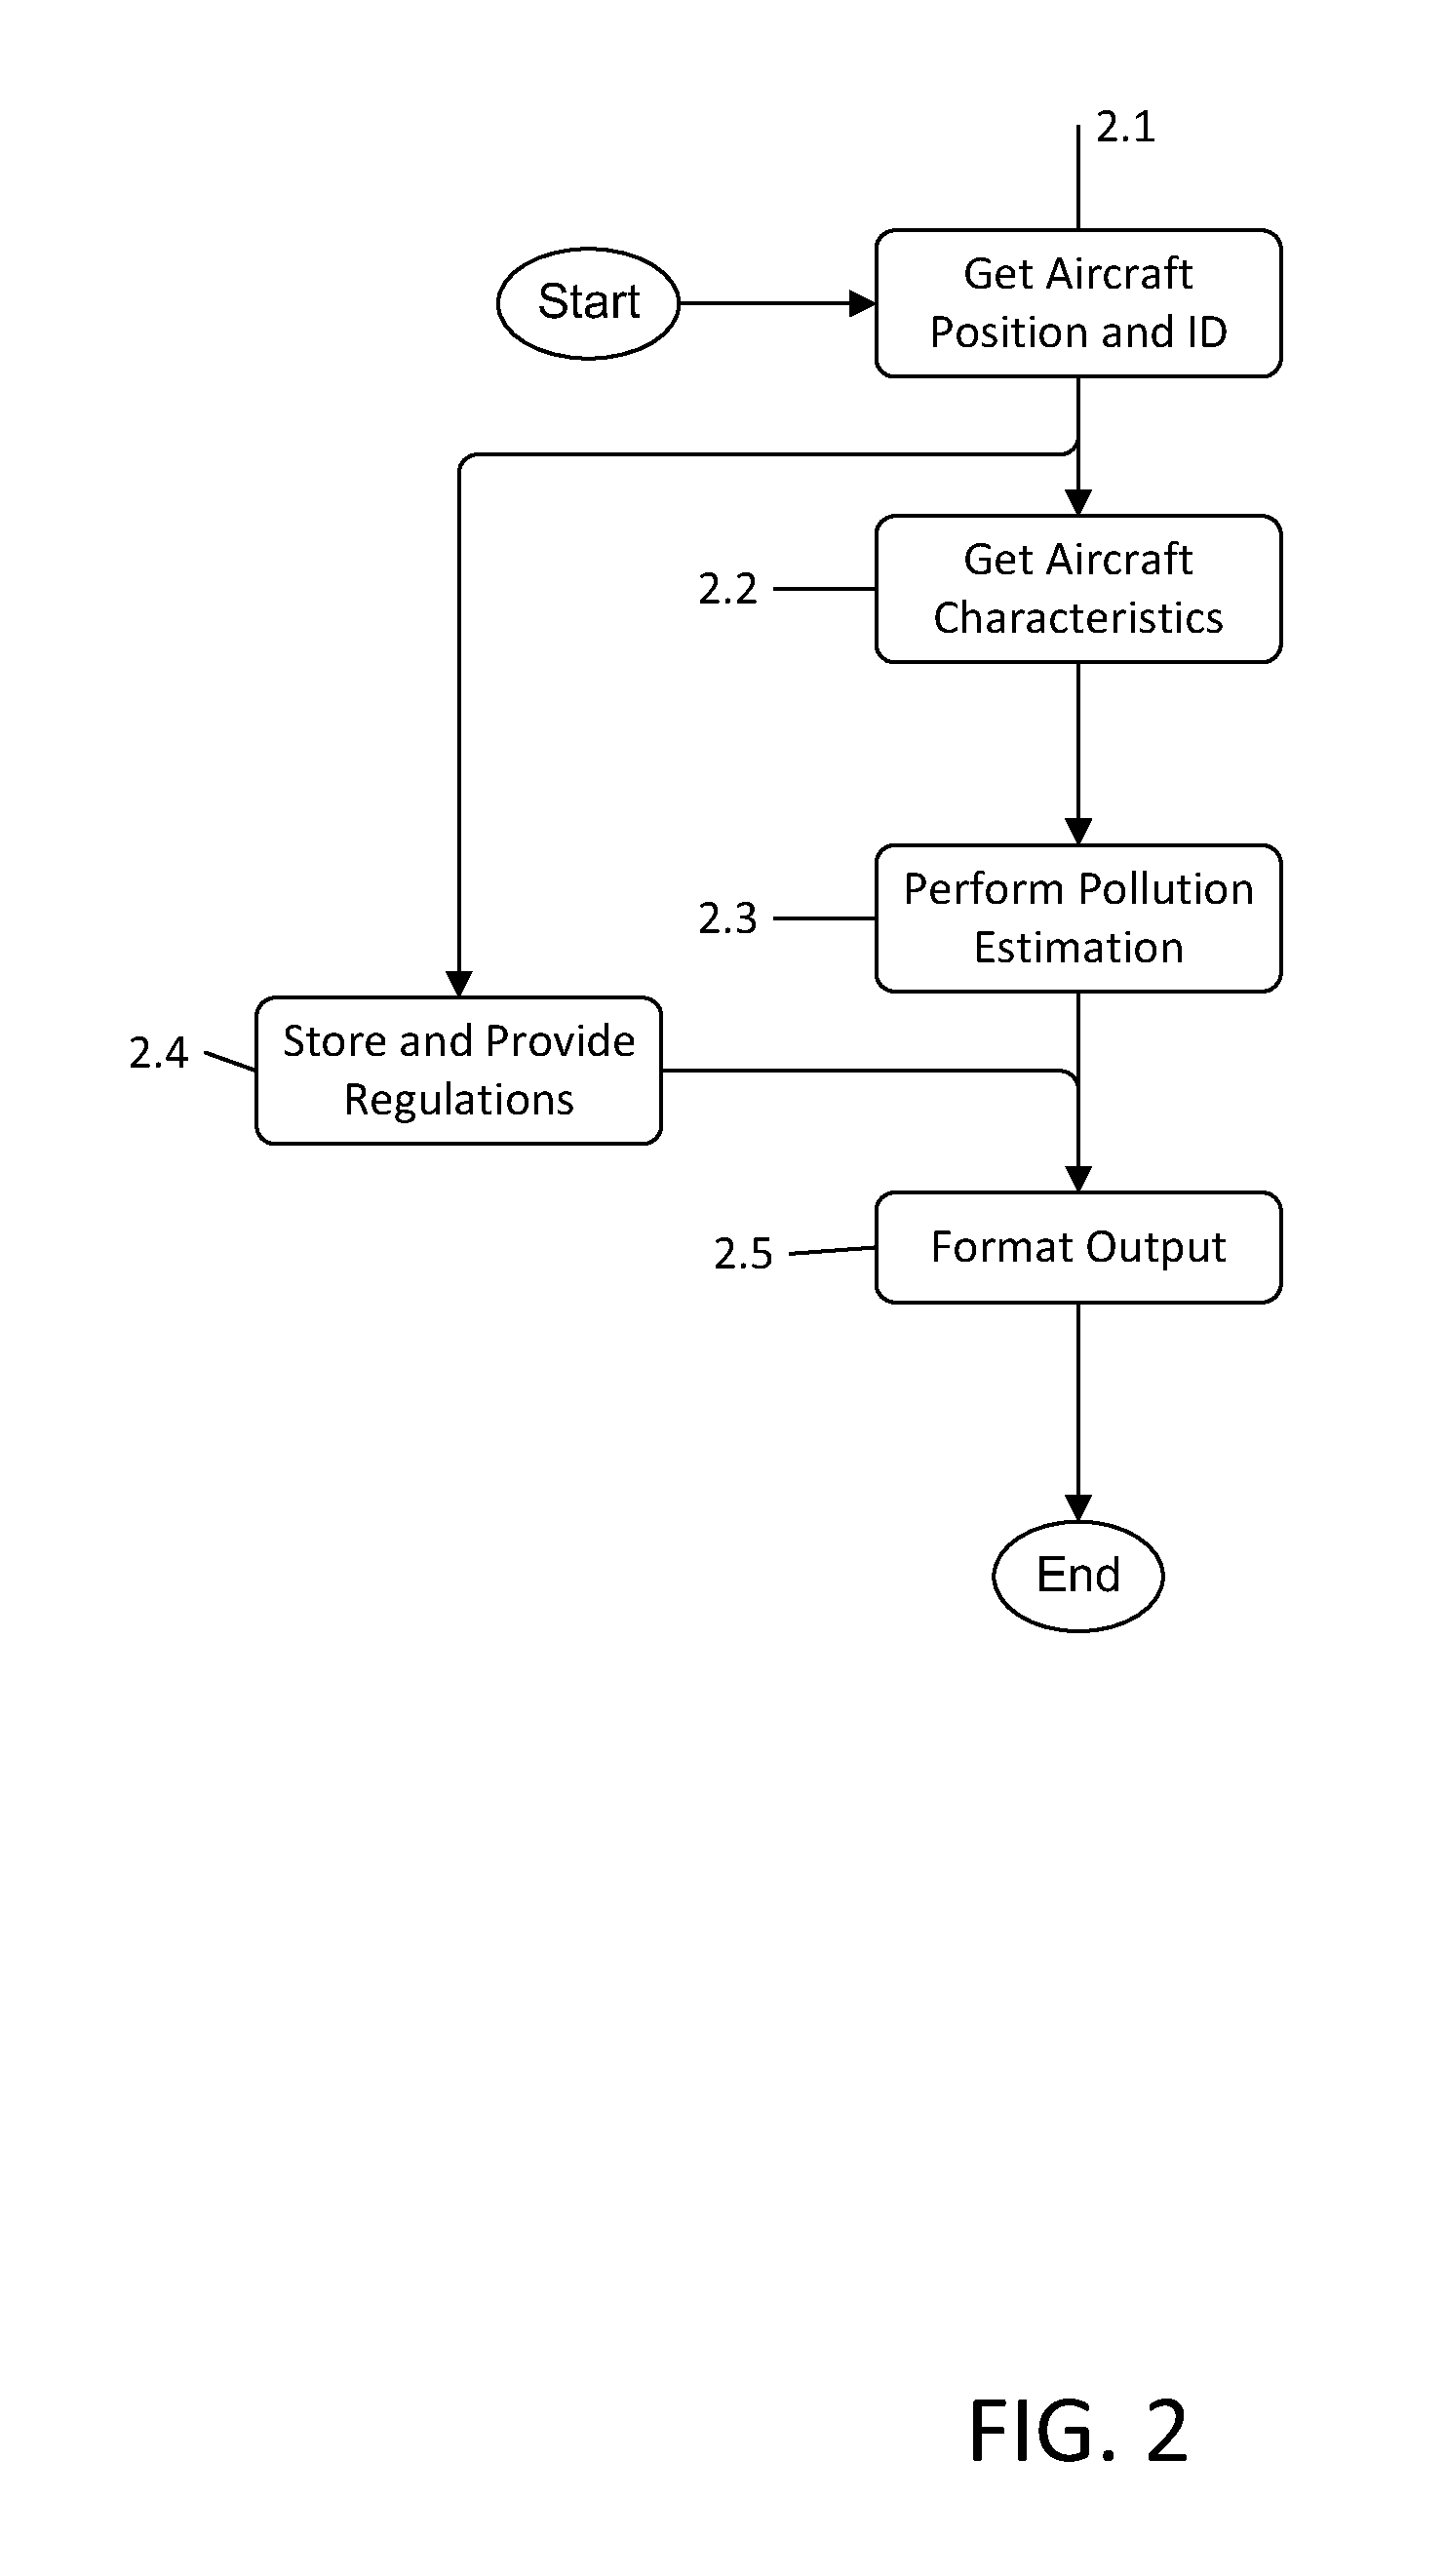 System and method for aircraft pollution accountability and compliance tracking